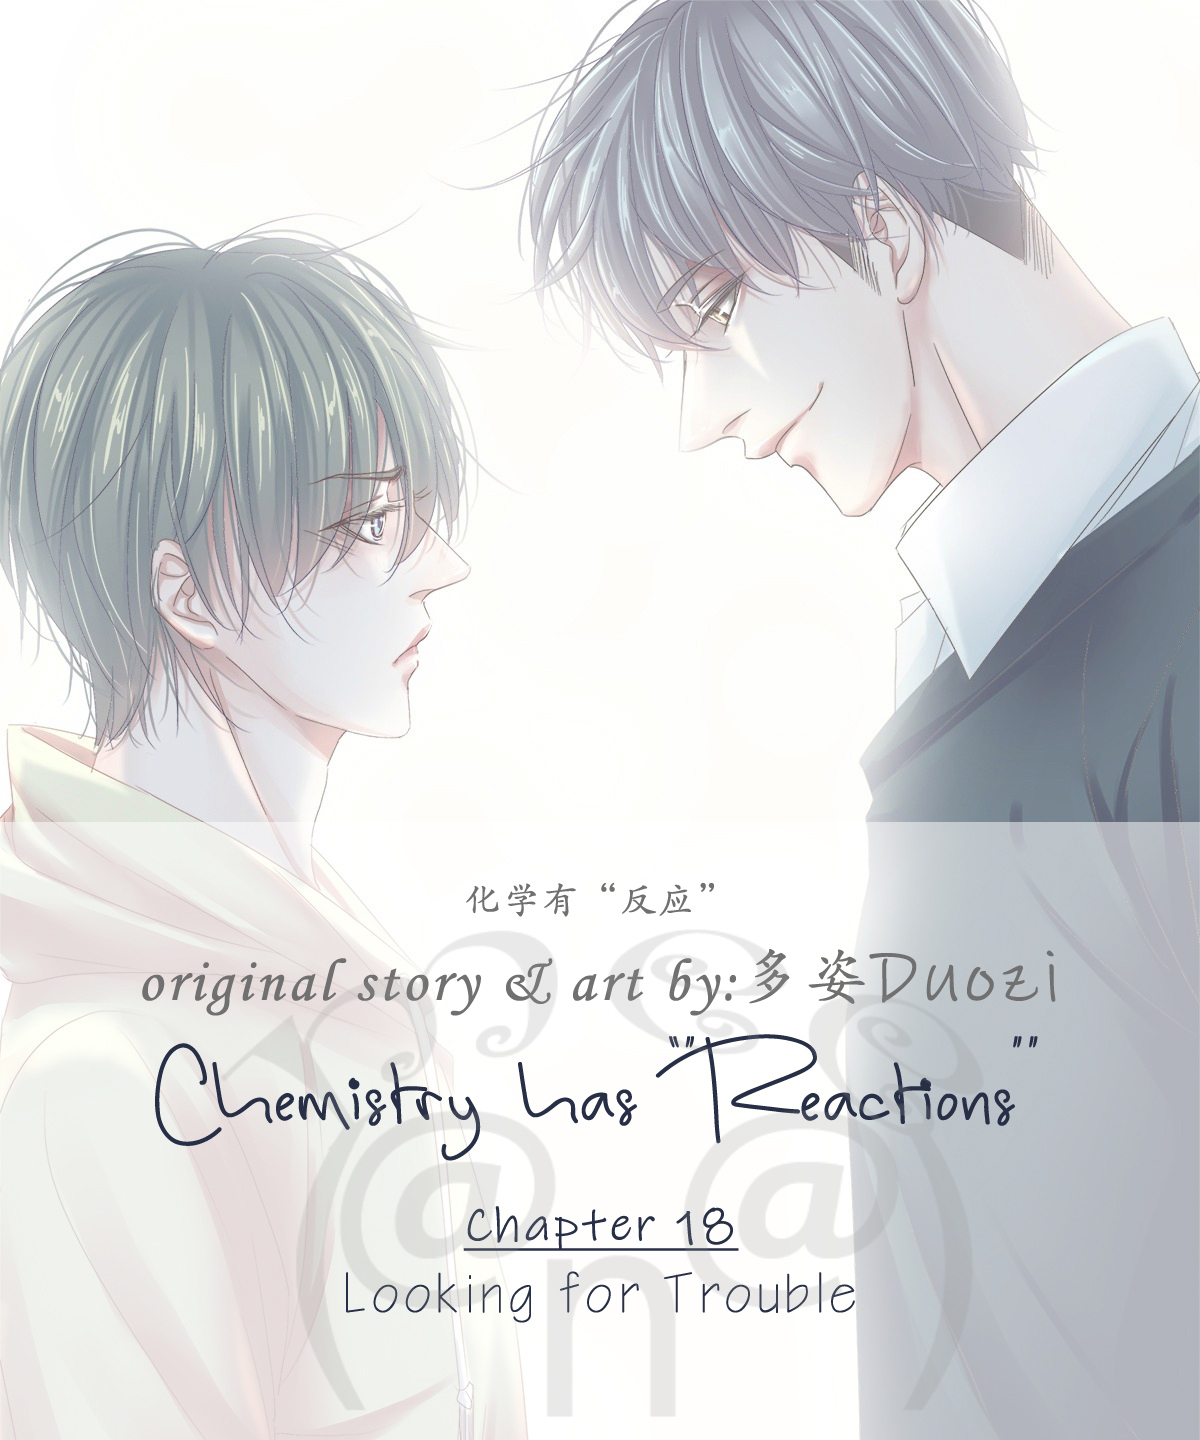 Chemistry has "Reactions" Vol. 1 Ch. 18